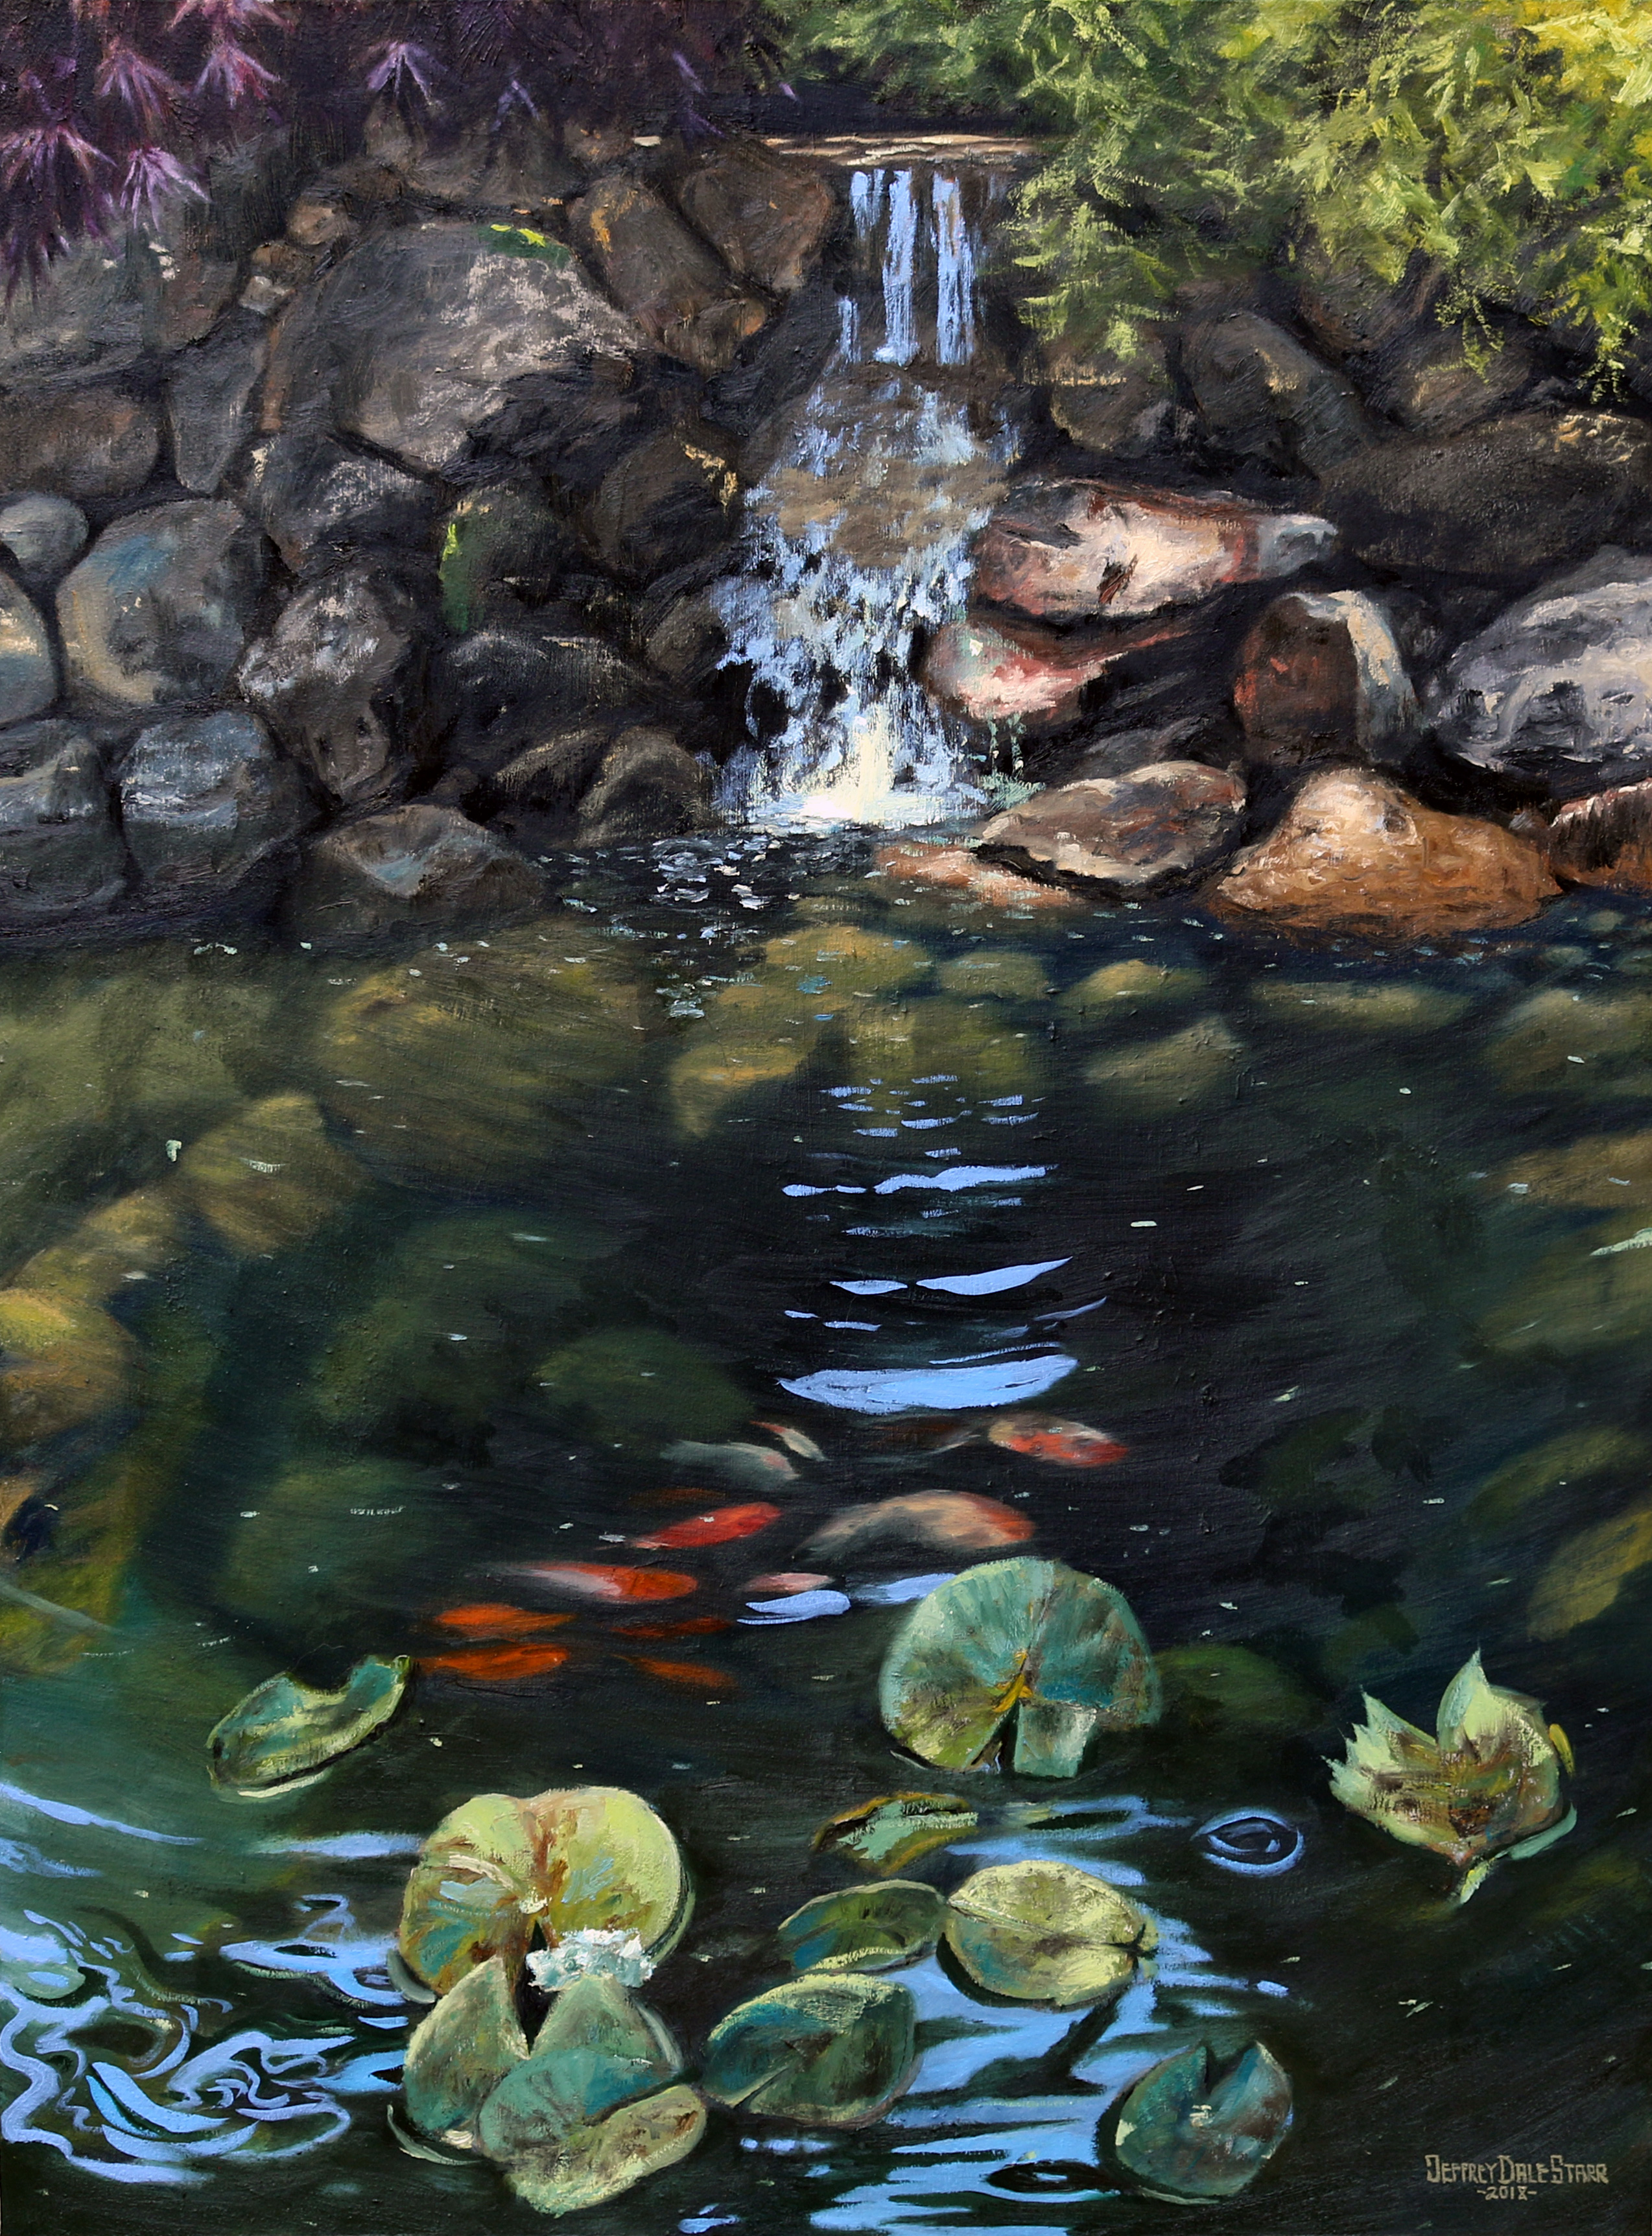 Oil painting "Koi Pond" by Jeffrey Dale Starr